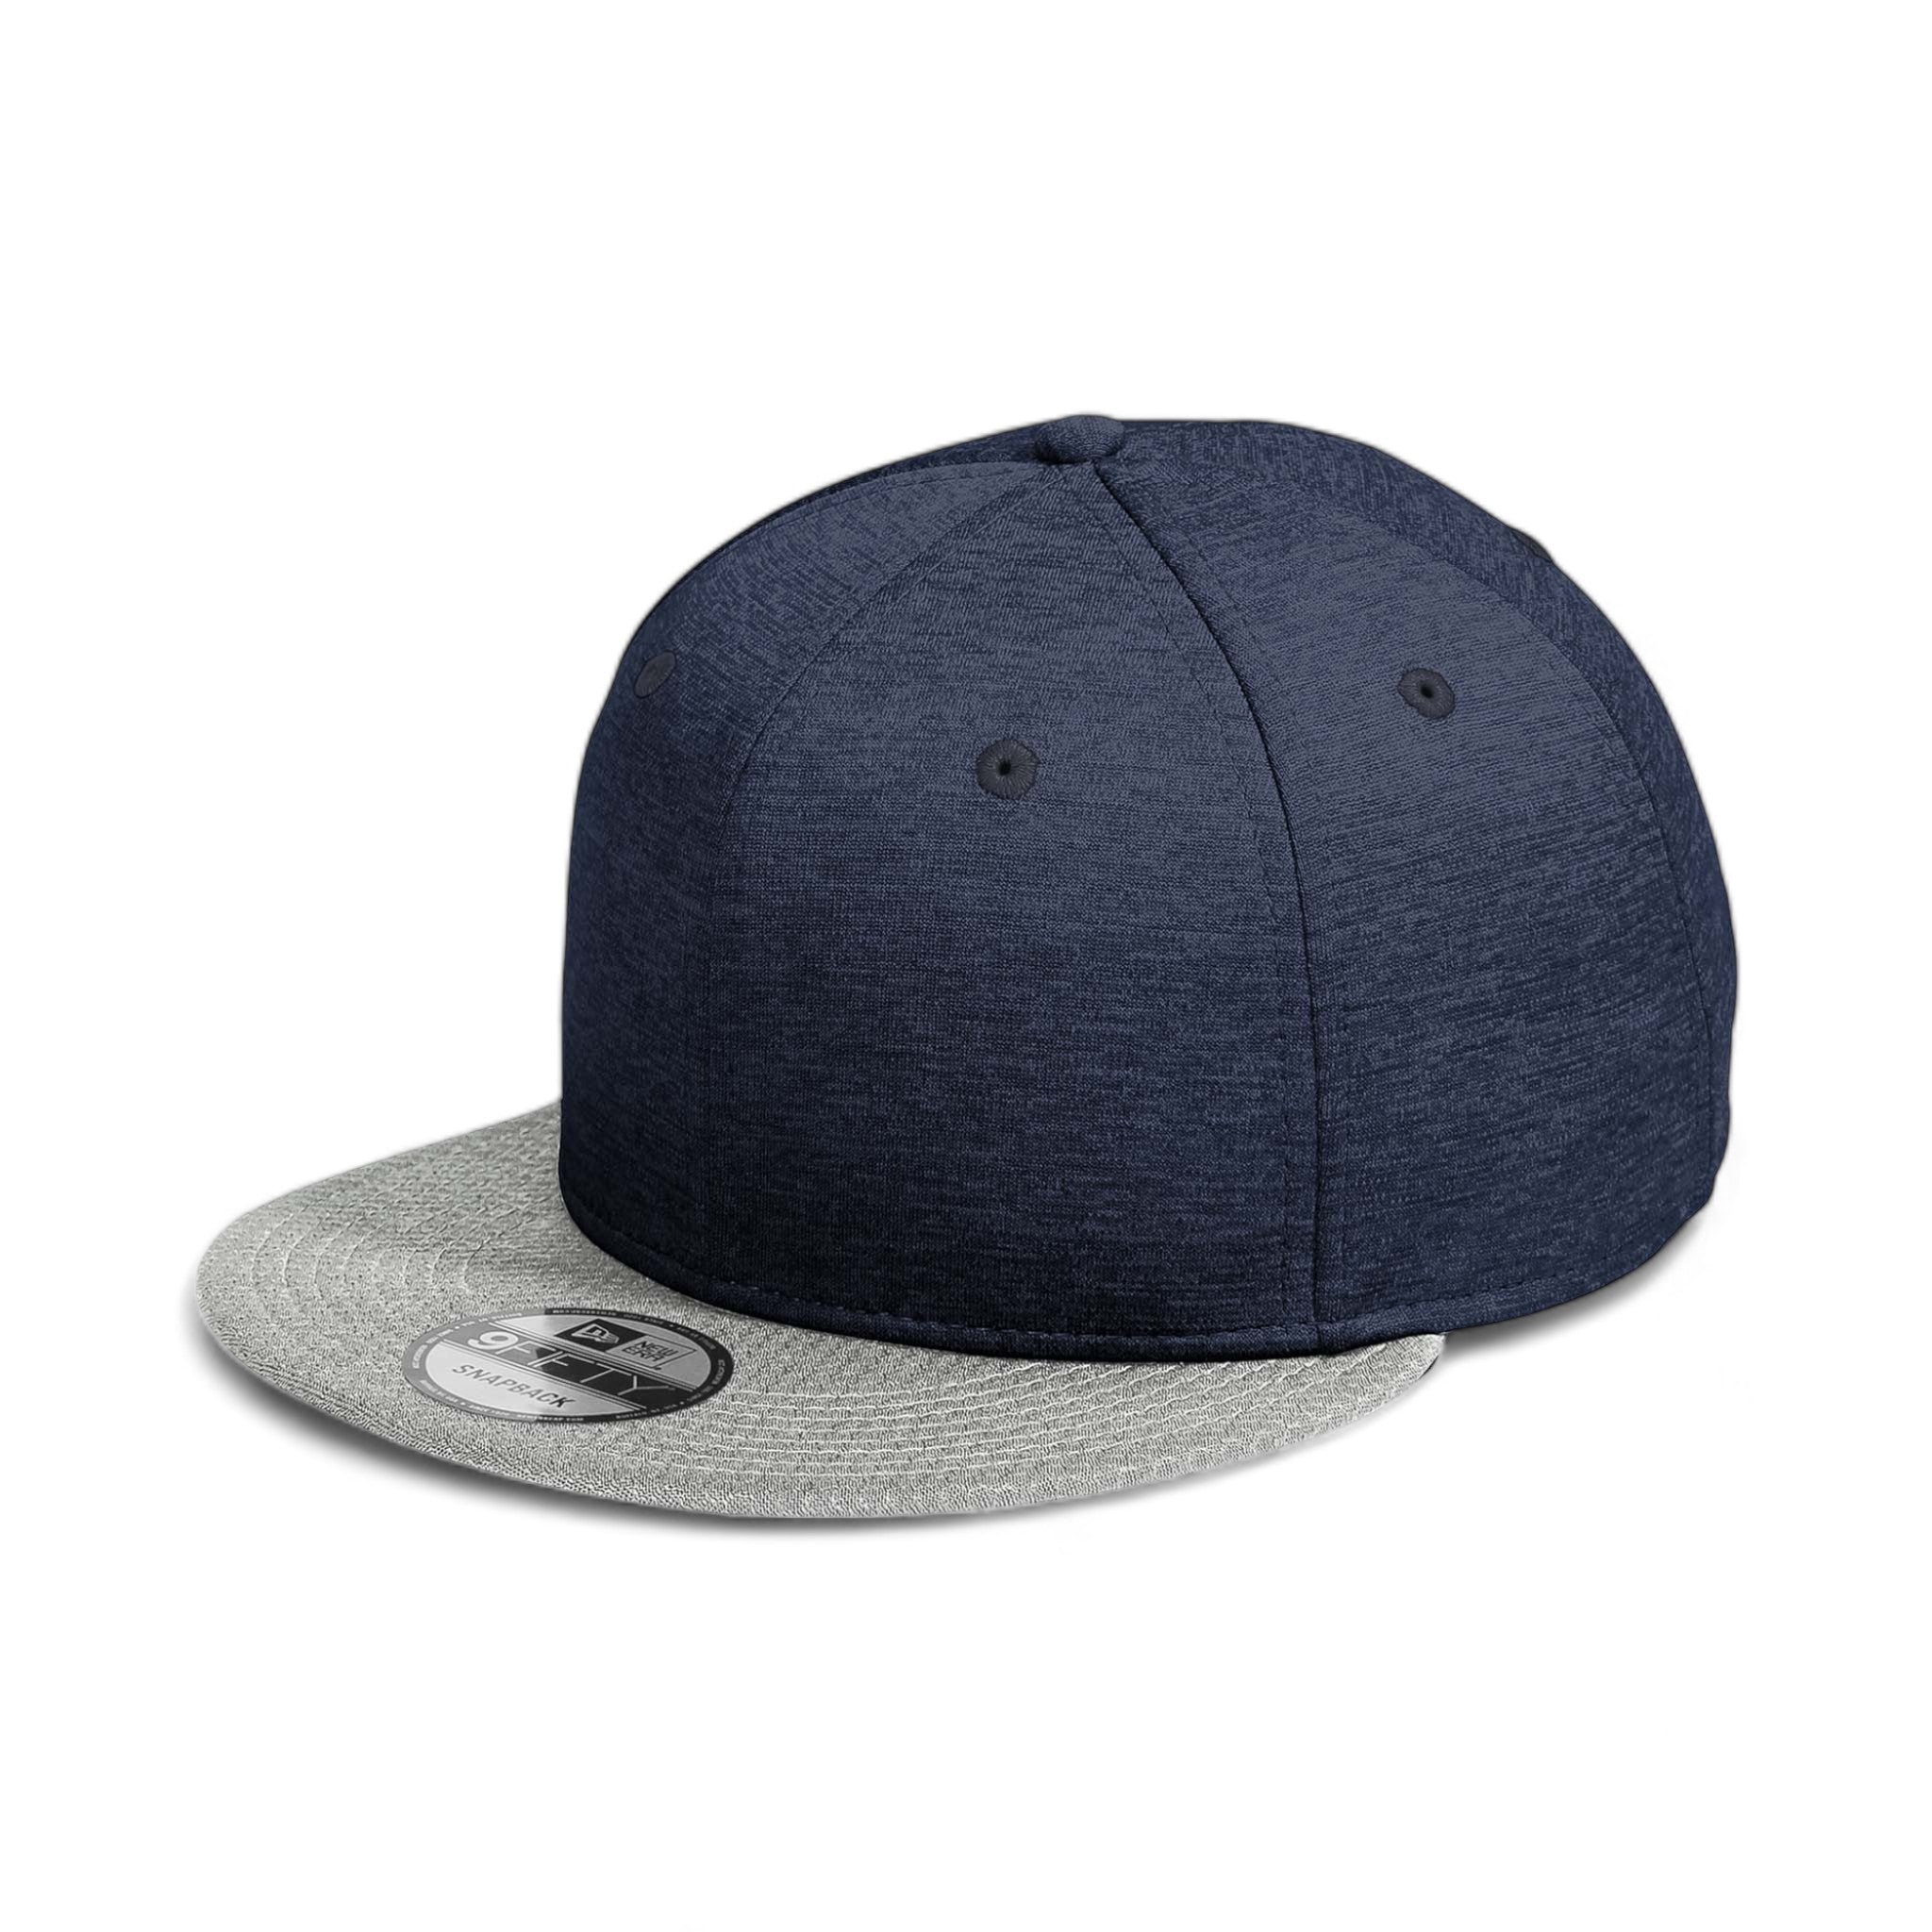 Side view of New Era NE408 custom hat in navy shadow heather and grey